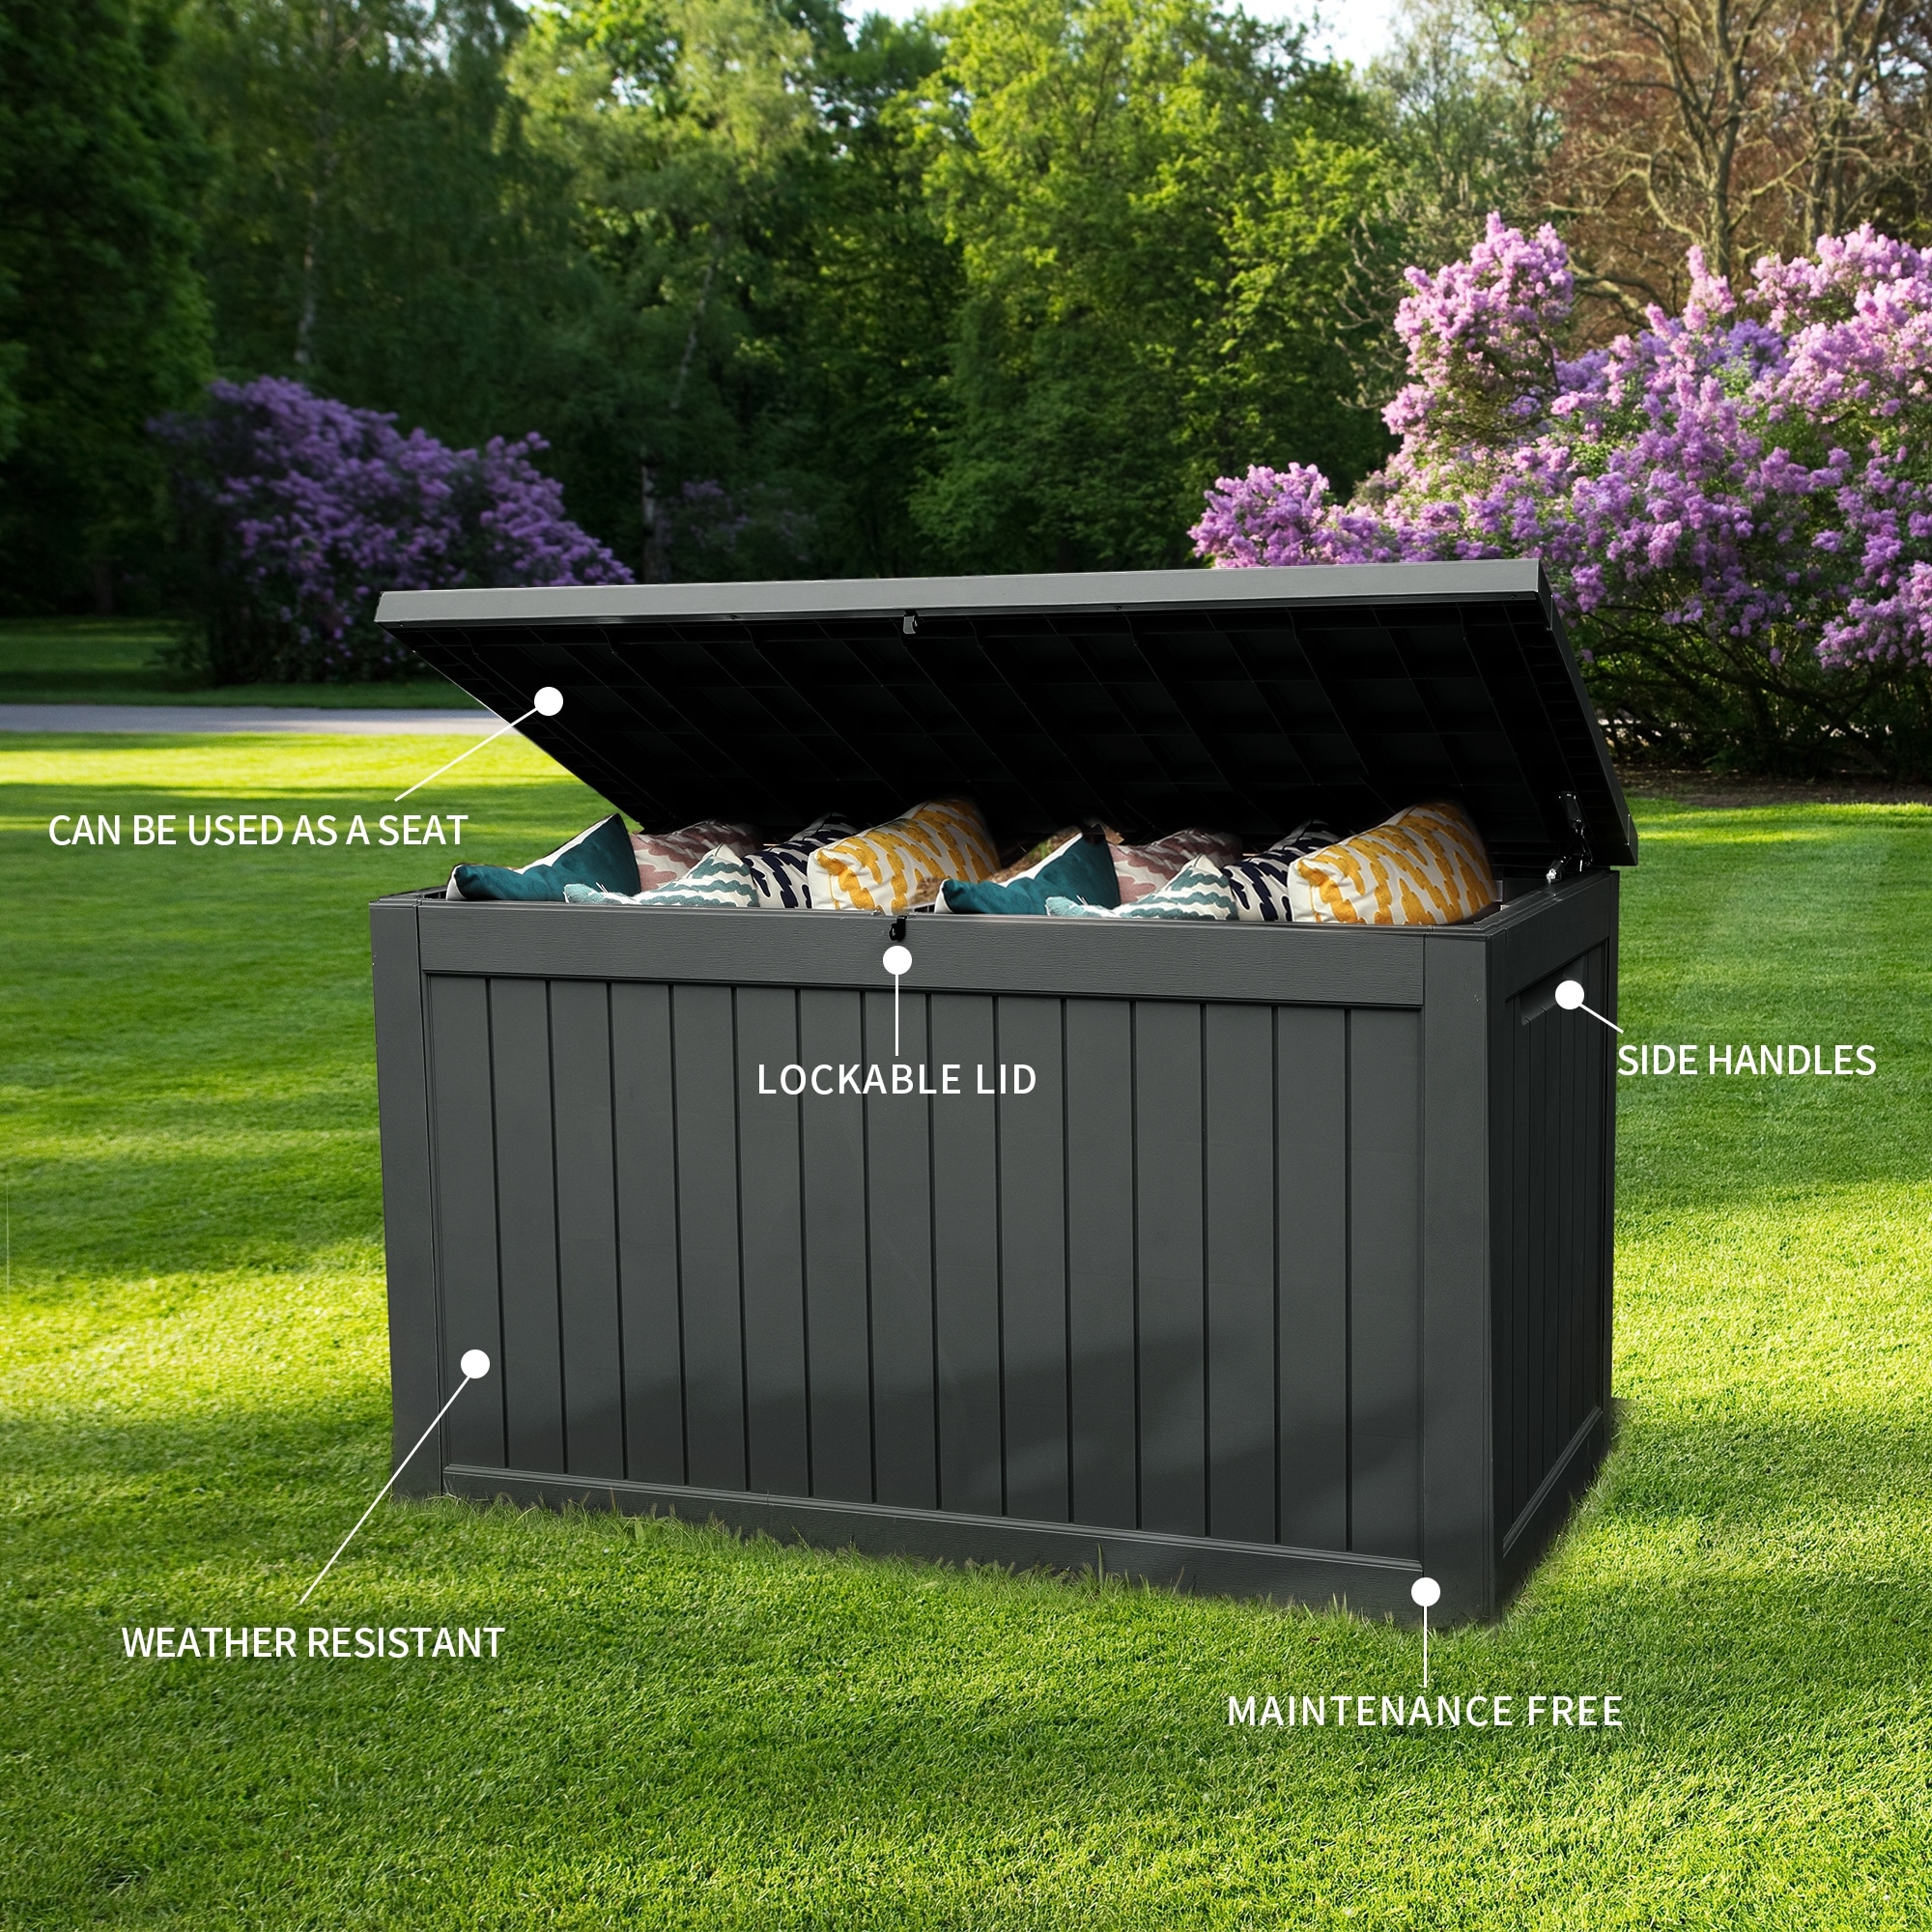 https://ak1.ostkcdn.com/images/products/is/images/direct/9e5e6dd0663cfc8311e724cf51d0bf0adc785838/230-Gallon-Outdoor-Storage-Waterproof-Deck-Box.jpg